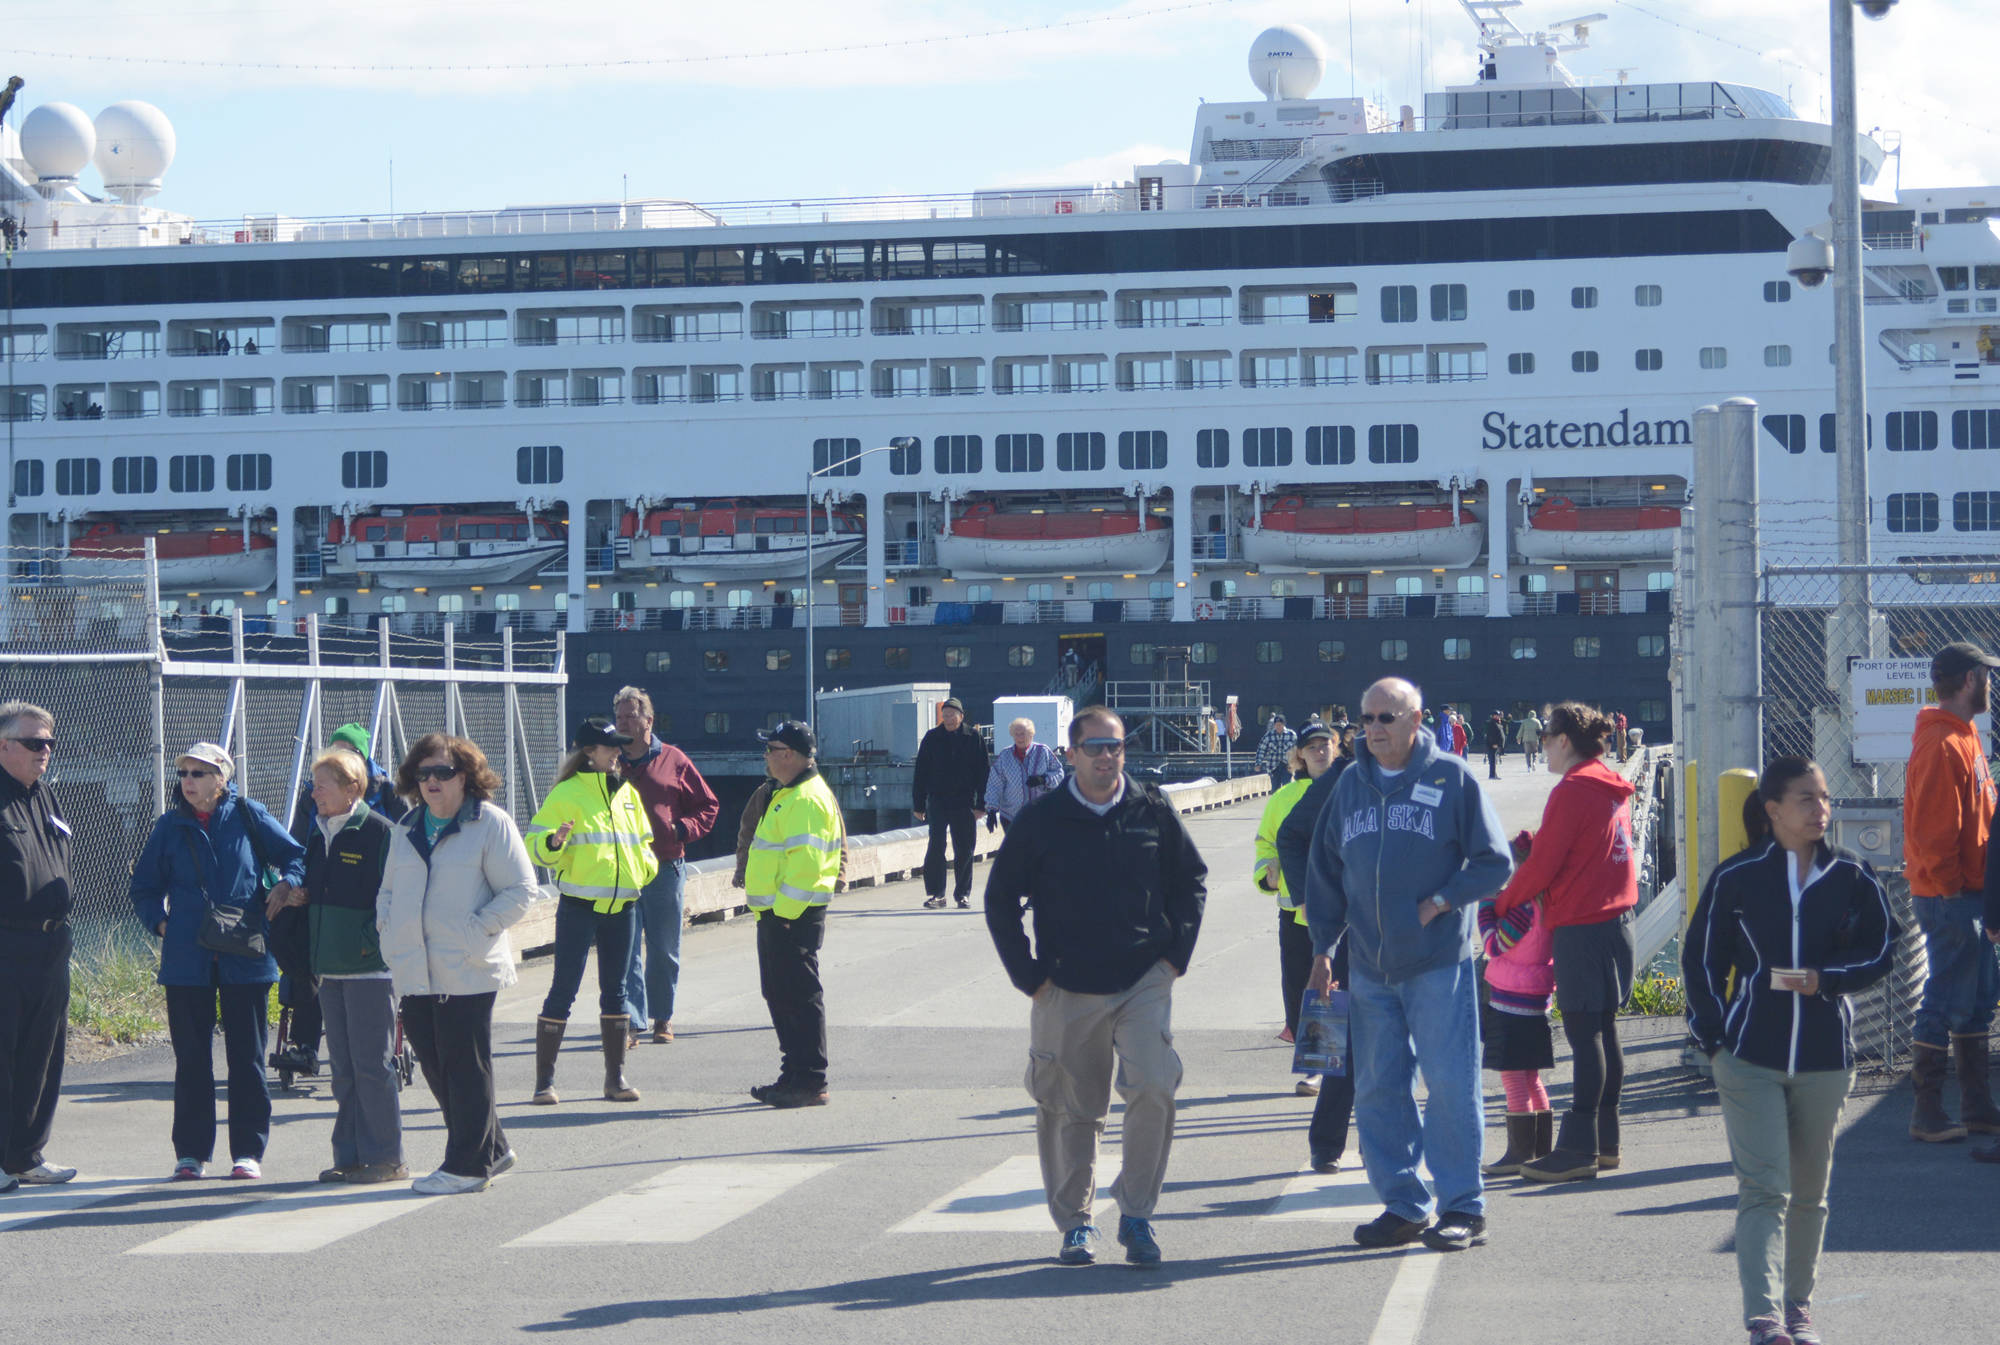 Passengers disembark from the M/V Statendam in May 2015 after the Holland America cruise ship arrived, the first of the season. (Photo by Michael Armstrong/Homer News)